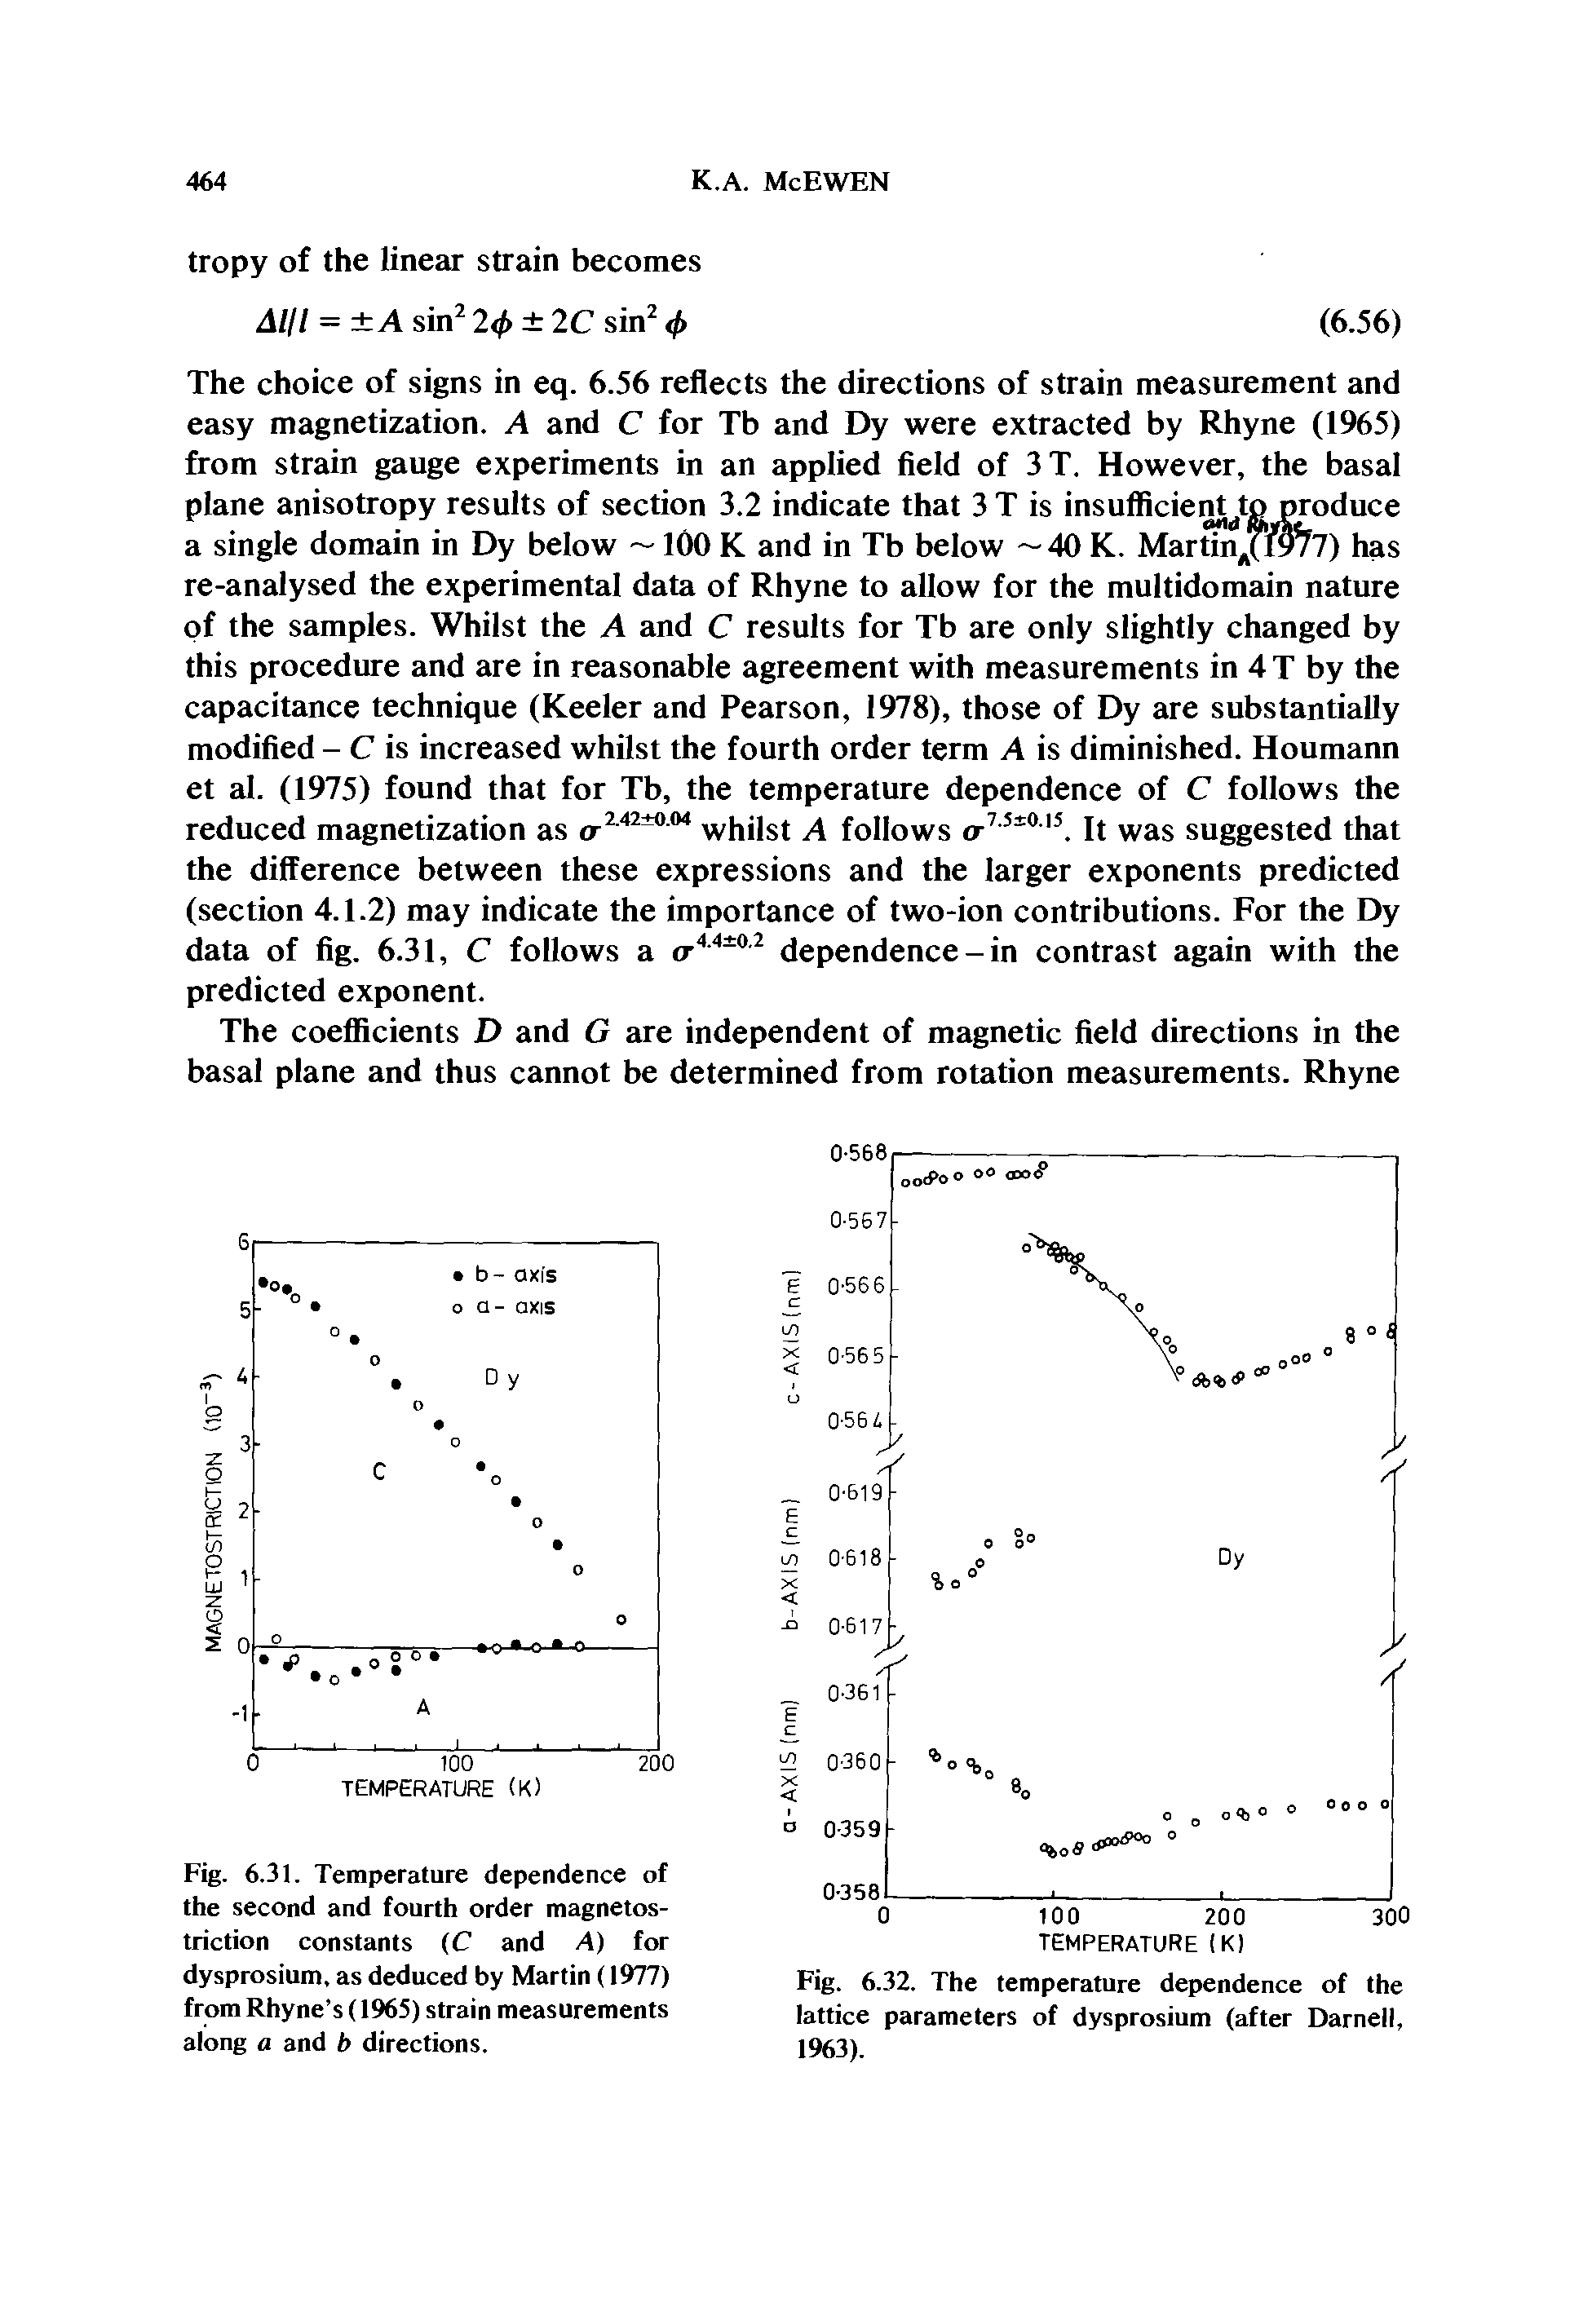 Fig. 6.31. Temperature dependence of the second and fourth order magnetostriction constants (C and A) for dysprosium, as deduced by Martin (1977) from Rhyne s (1965) strain measurements along a and b directions.